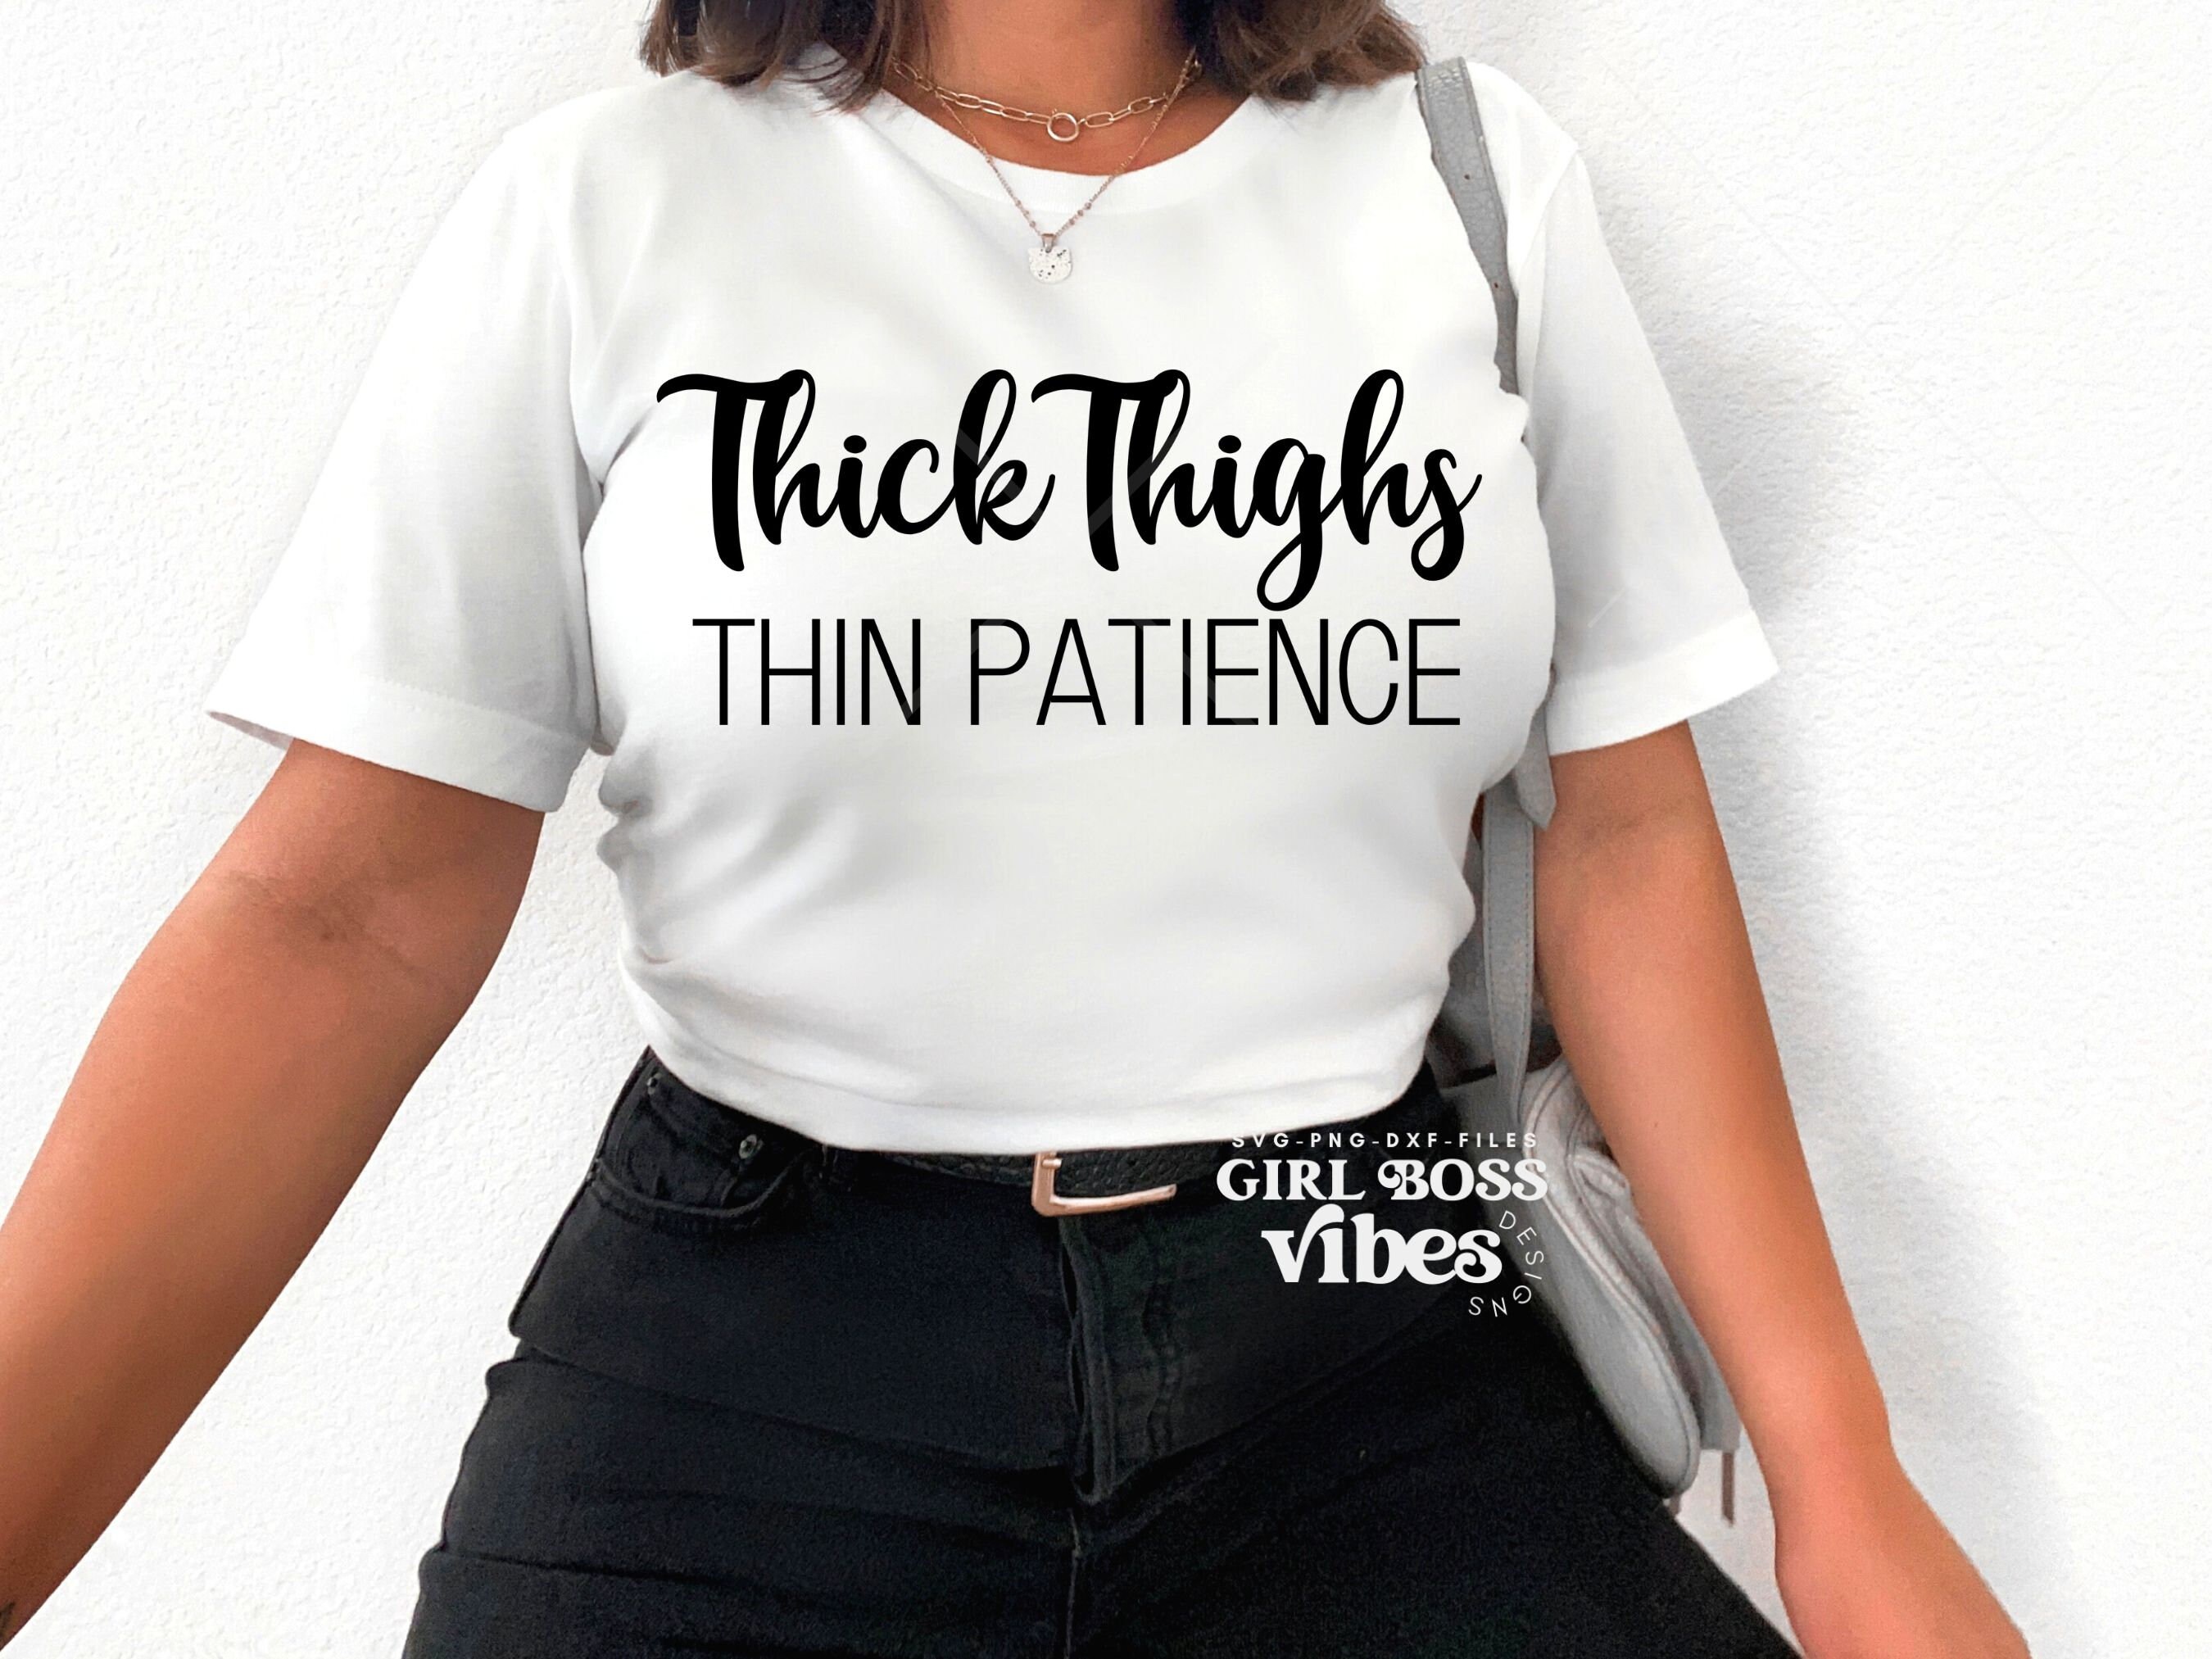 Thick Thighs Thin Patience Shirt sold by Scott Anderson, SKU 38313223